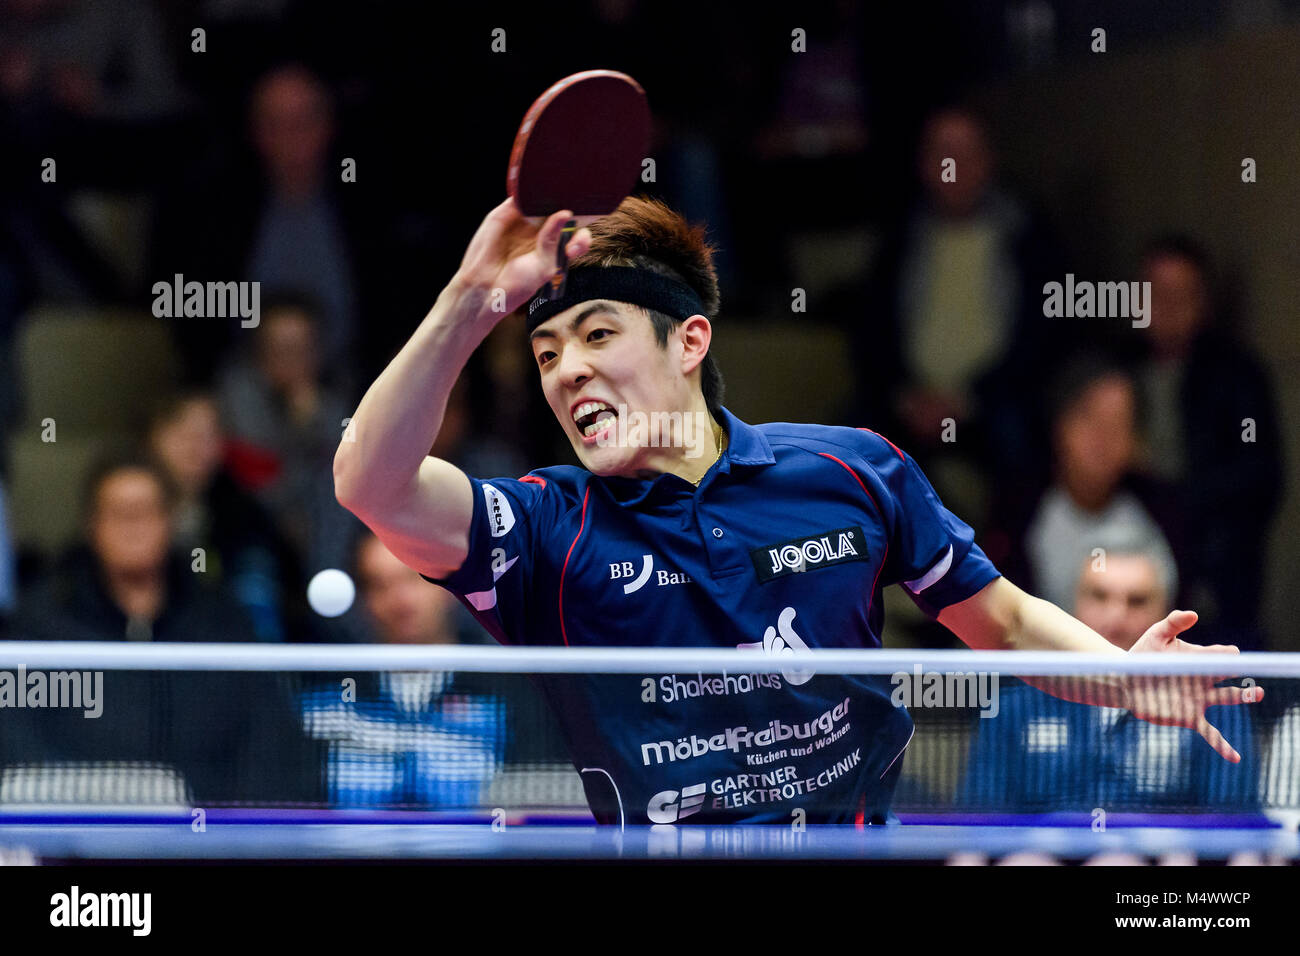 Tischtennis High Resolution Stock Photography and Images - Alamy